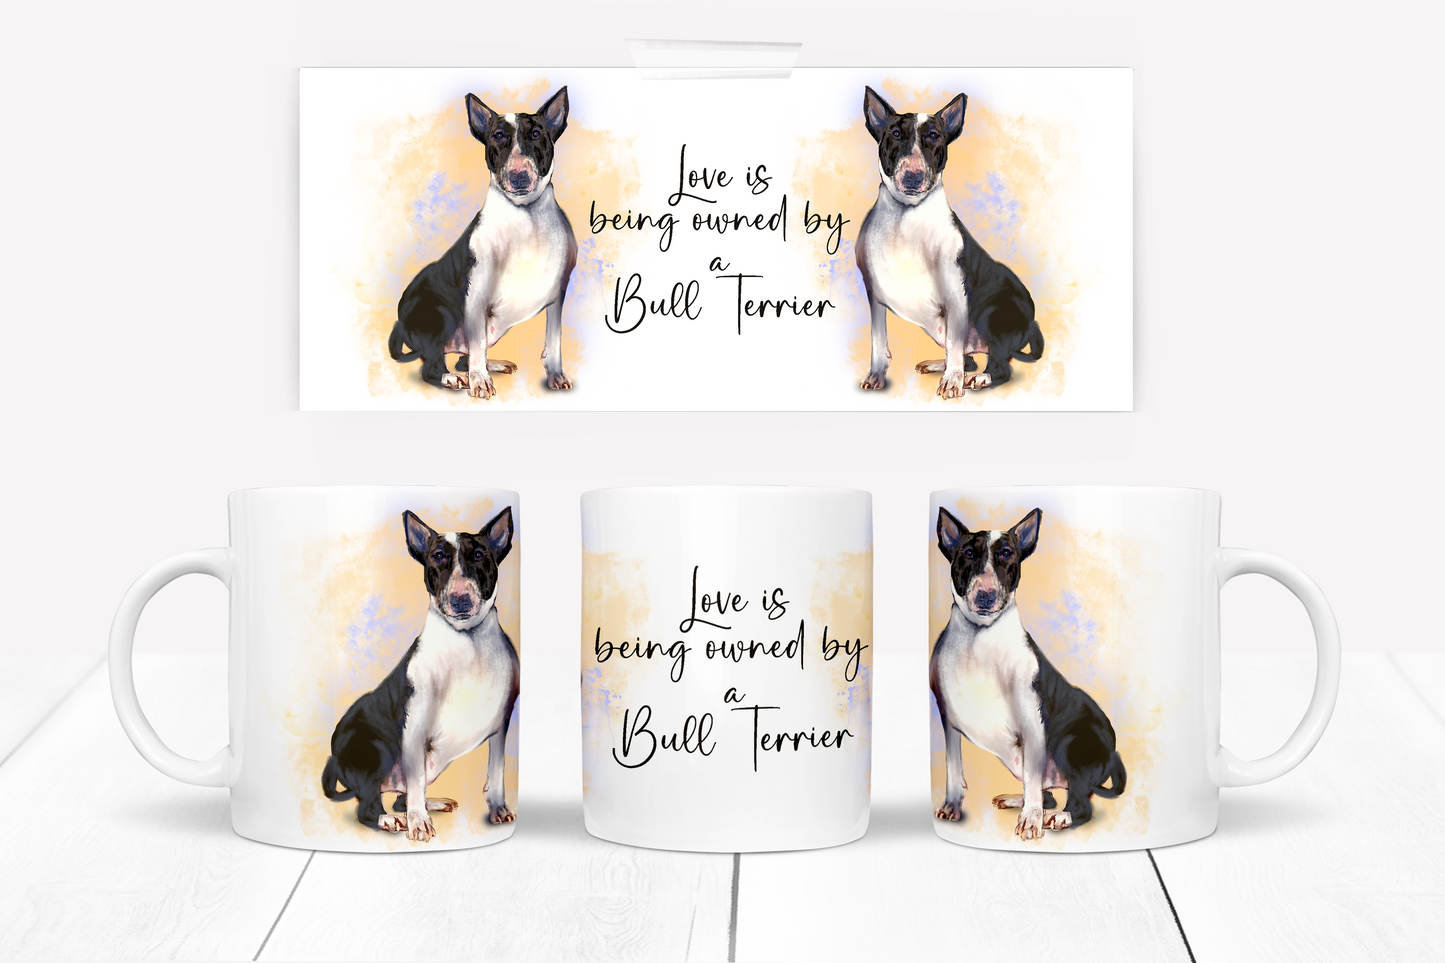  Owned By A English Bull Terrier Dog Mug by Free Spirit Accessories sold by Free Spirit Accessories